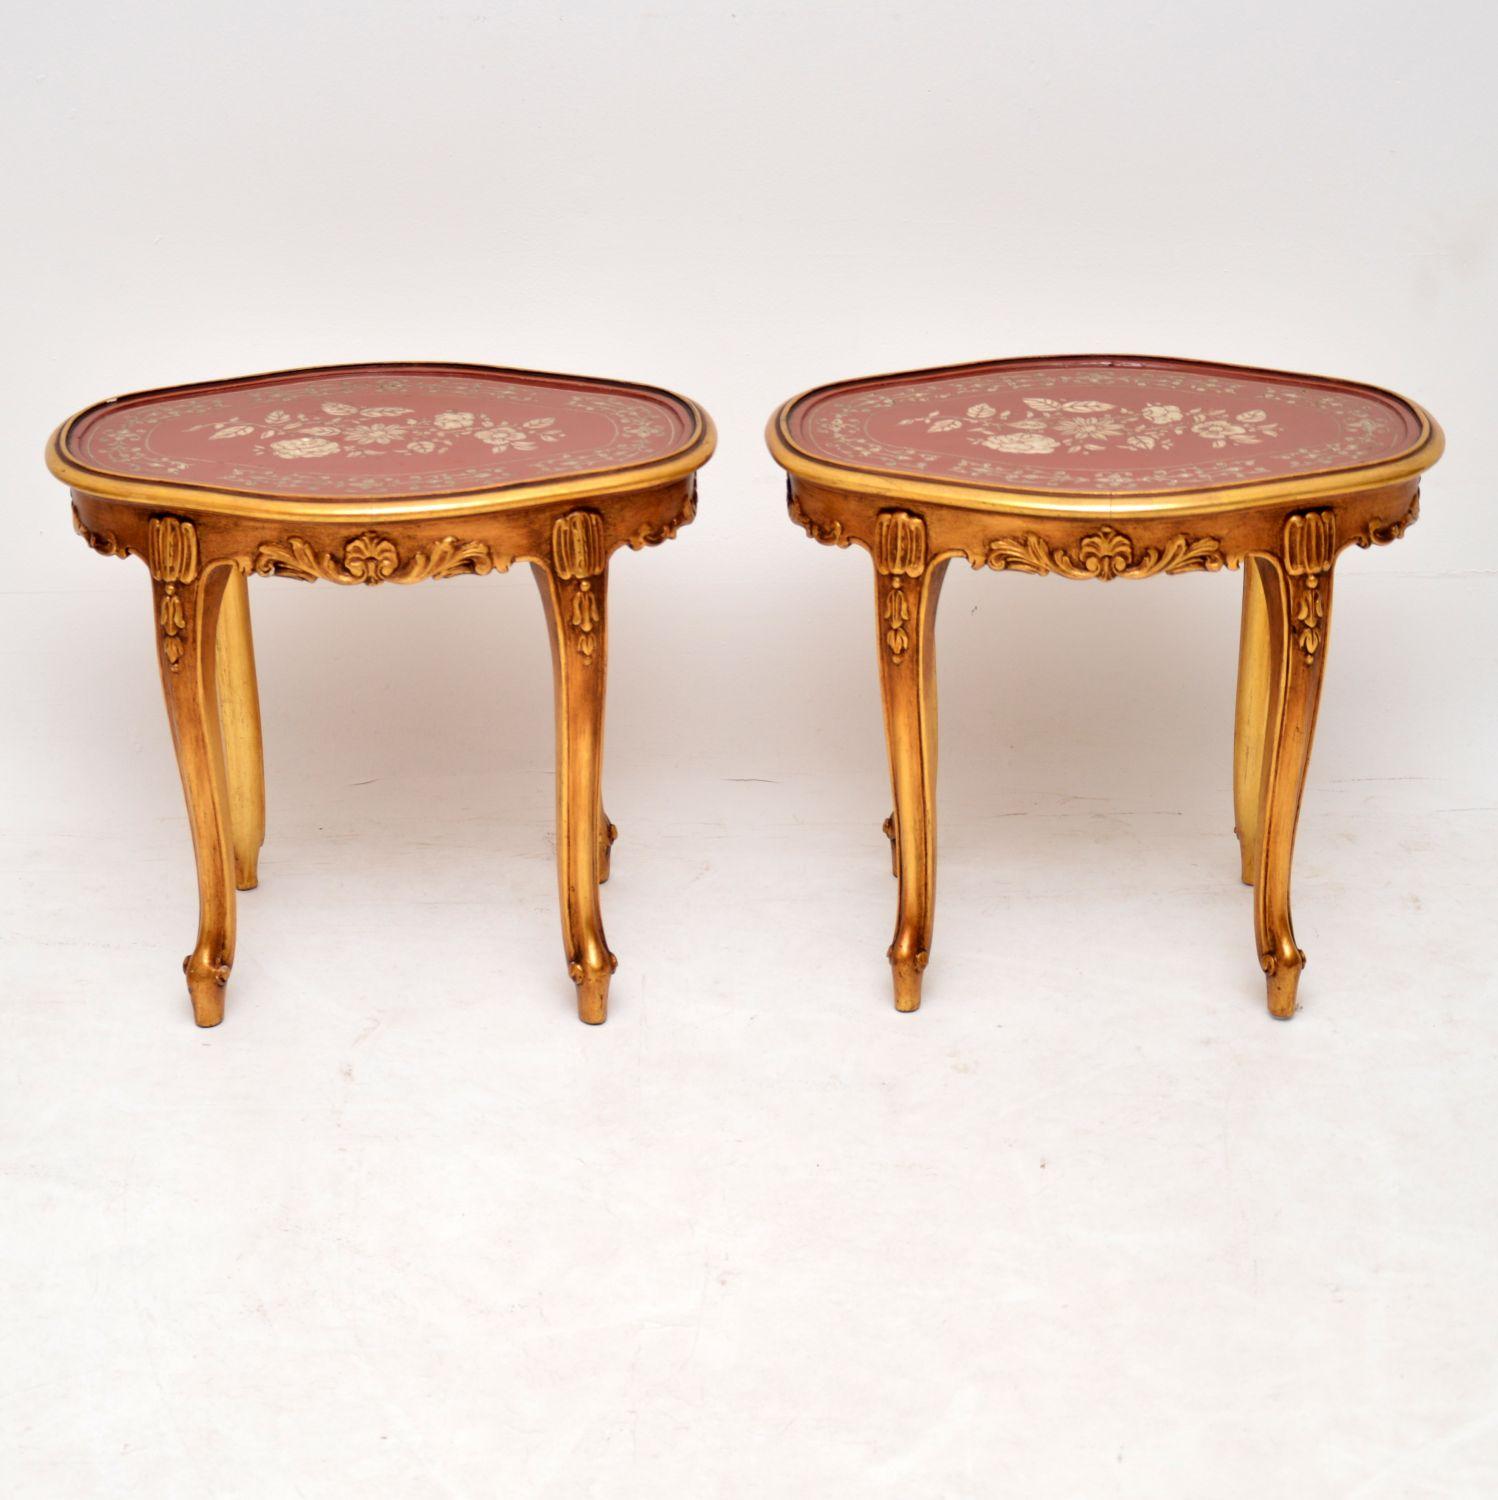 This pair of antique French style giltwood & lacquered side tables do have a matching coffee table to go with them. However, I can’t predict if either item will sell individually. The tops have a red lacquered background with floral decoration. The